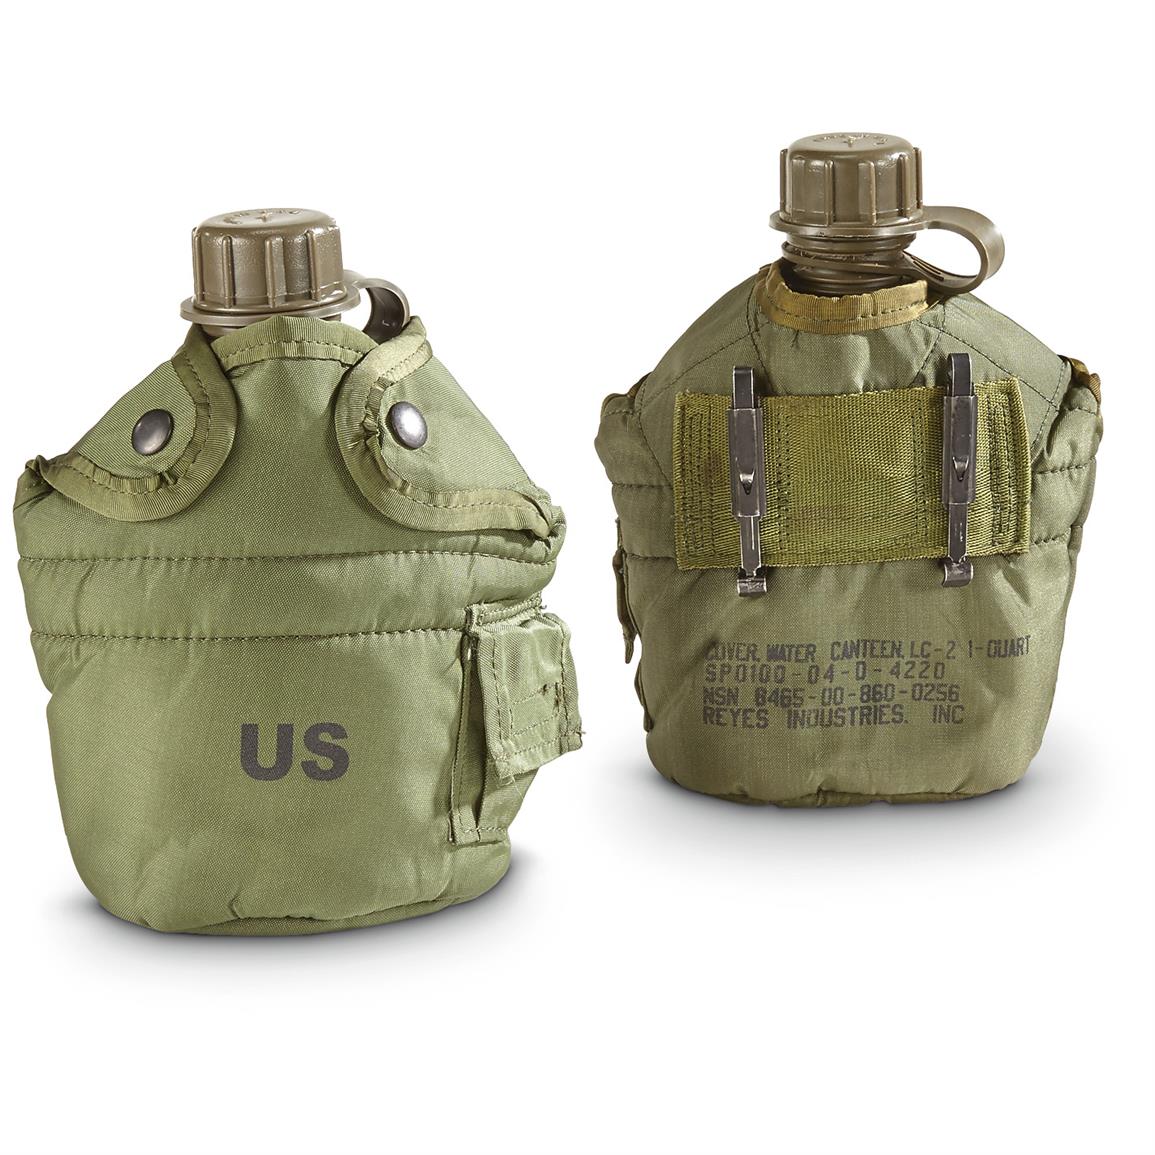 U.S. Military Surplus Canteens with Covers, 2 pack, Used